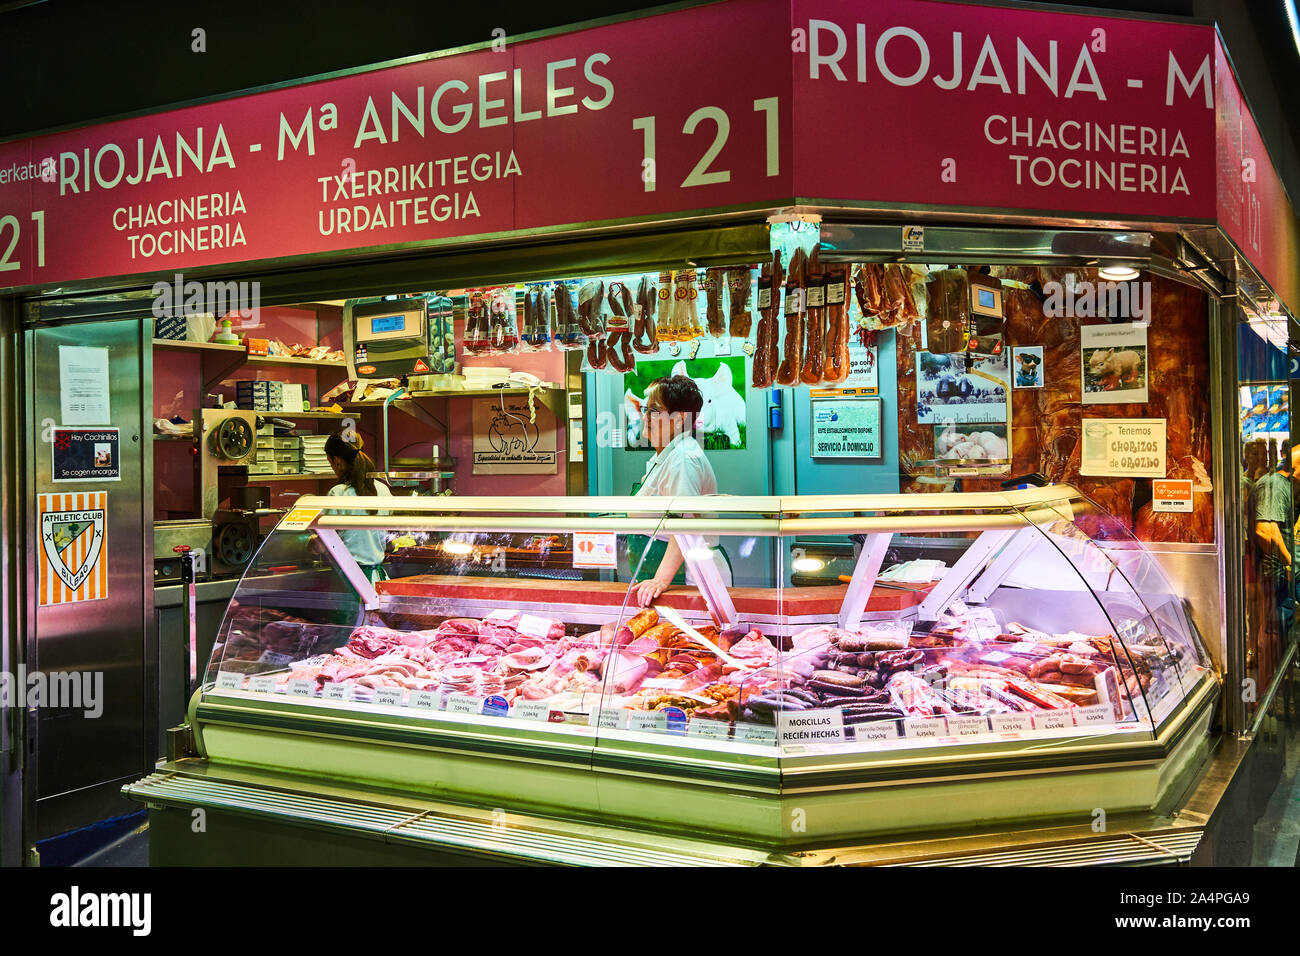 A cured meat stall at La Ribera market in the Old town of Bilbao, Spain Stock Photo